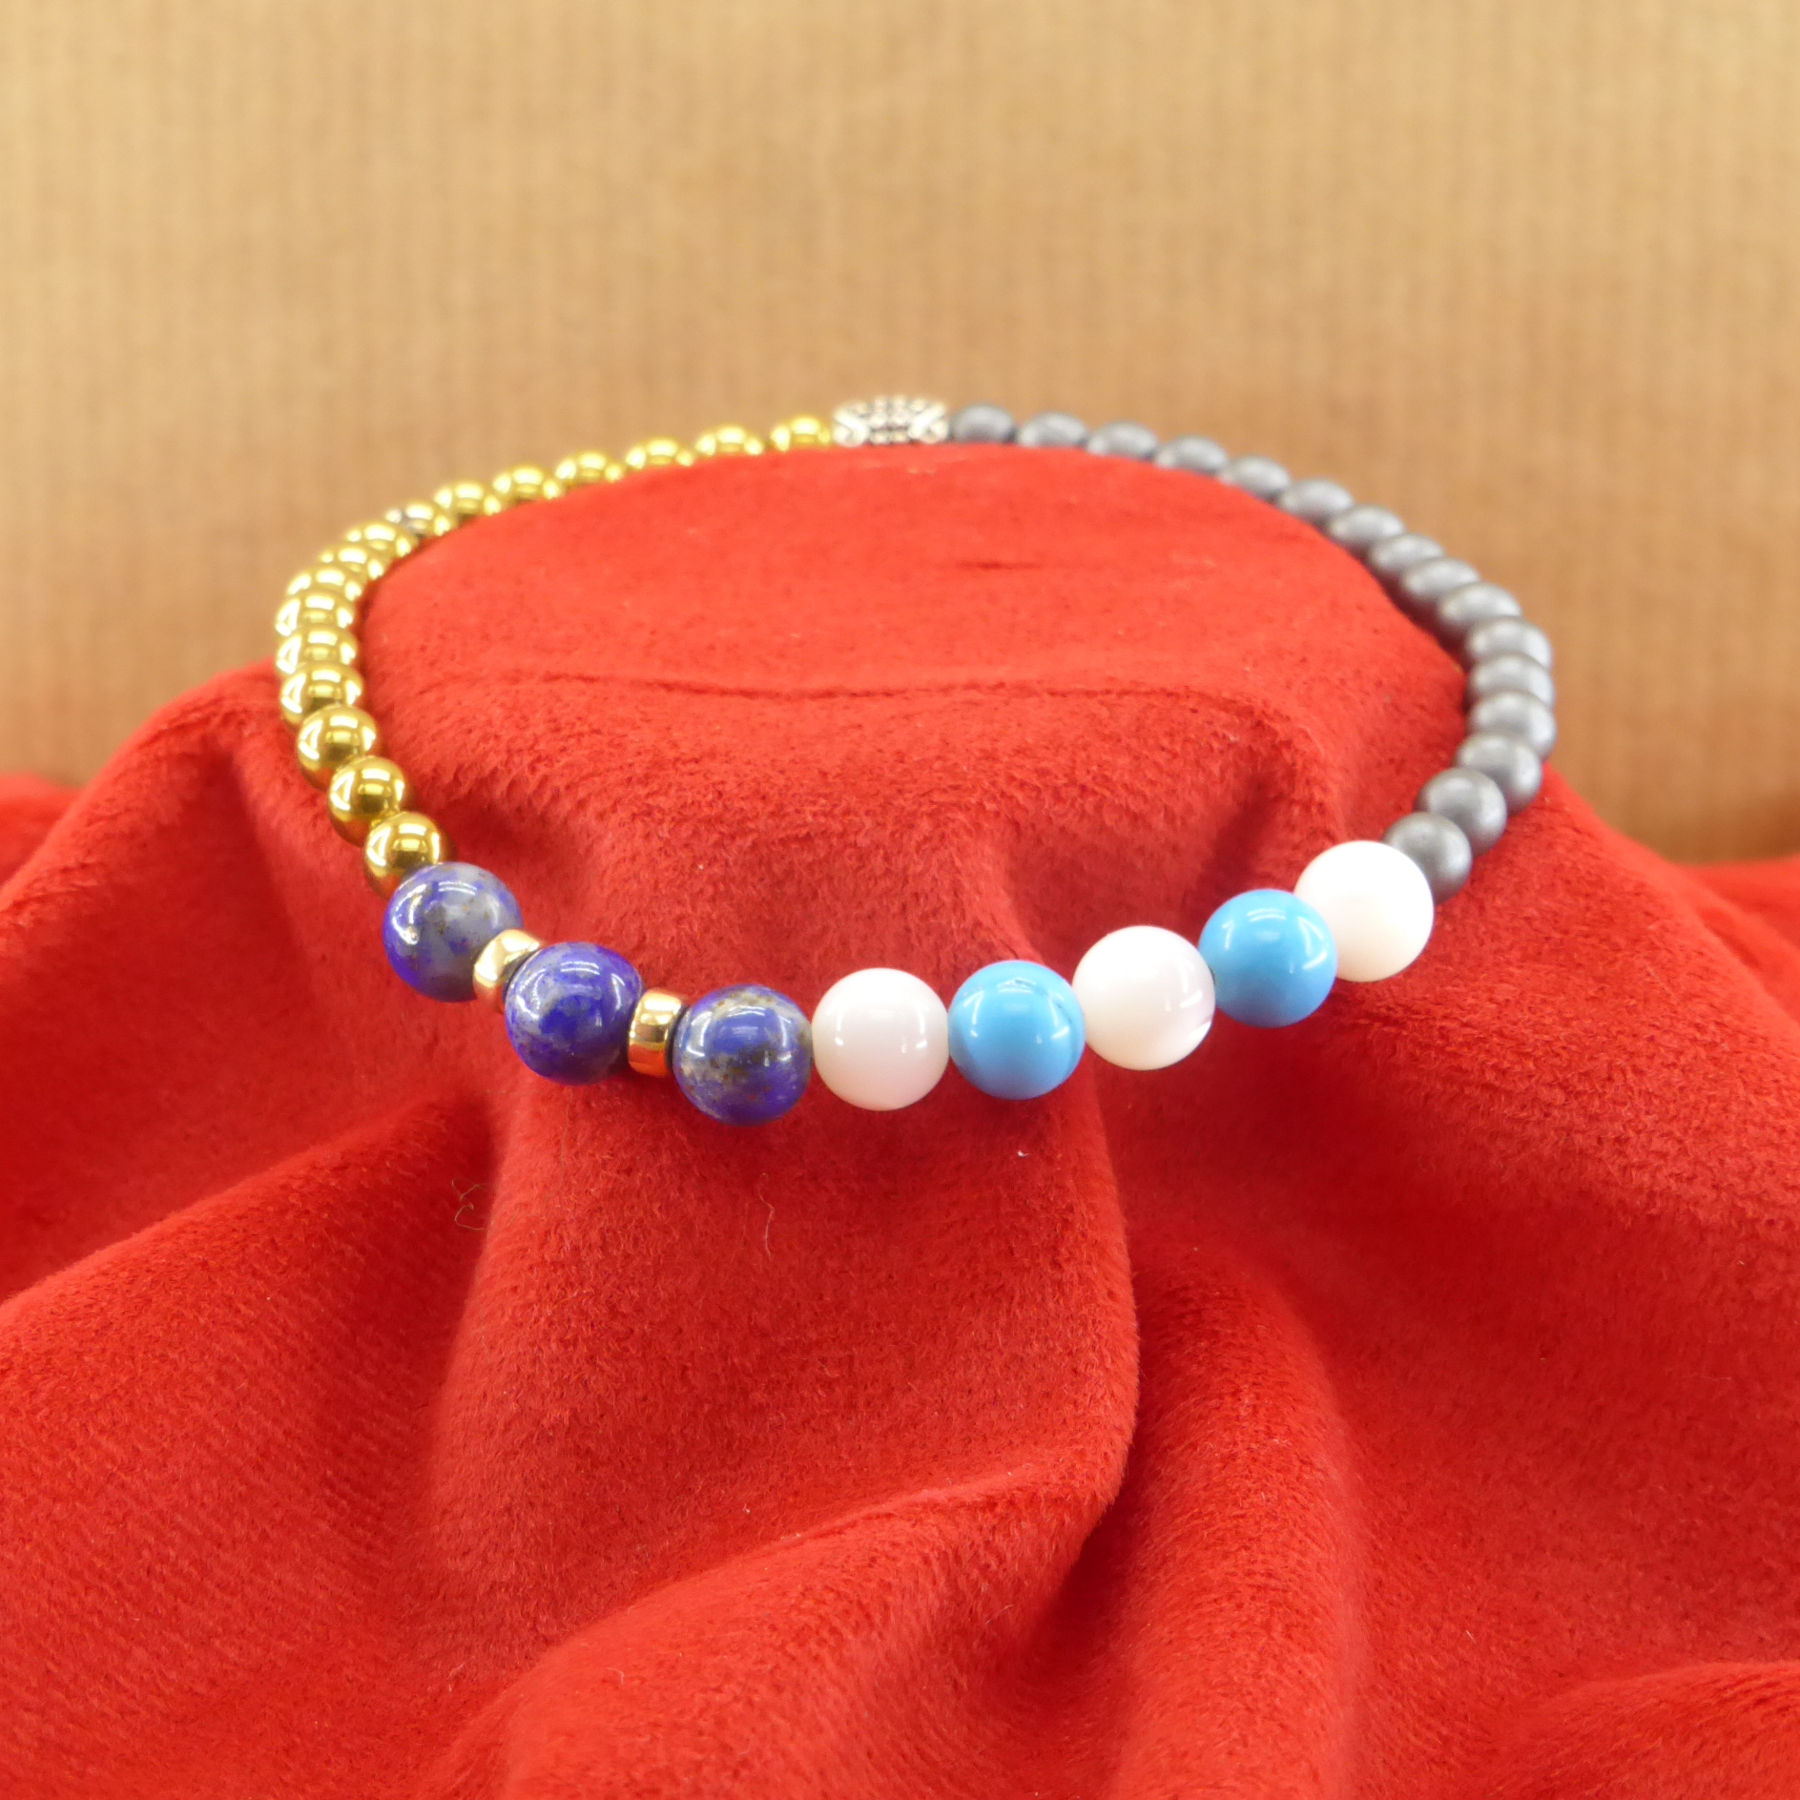 Lapis Lazuli bracelet, turquoise and mother-of-pearl on matt gray and gold hematite